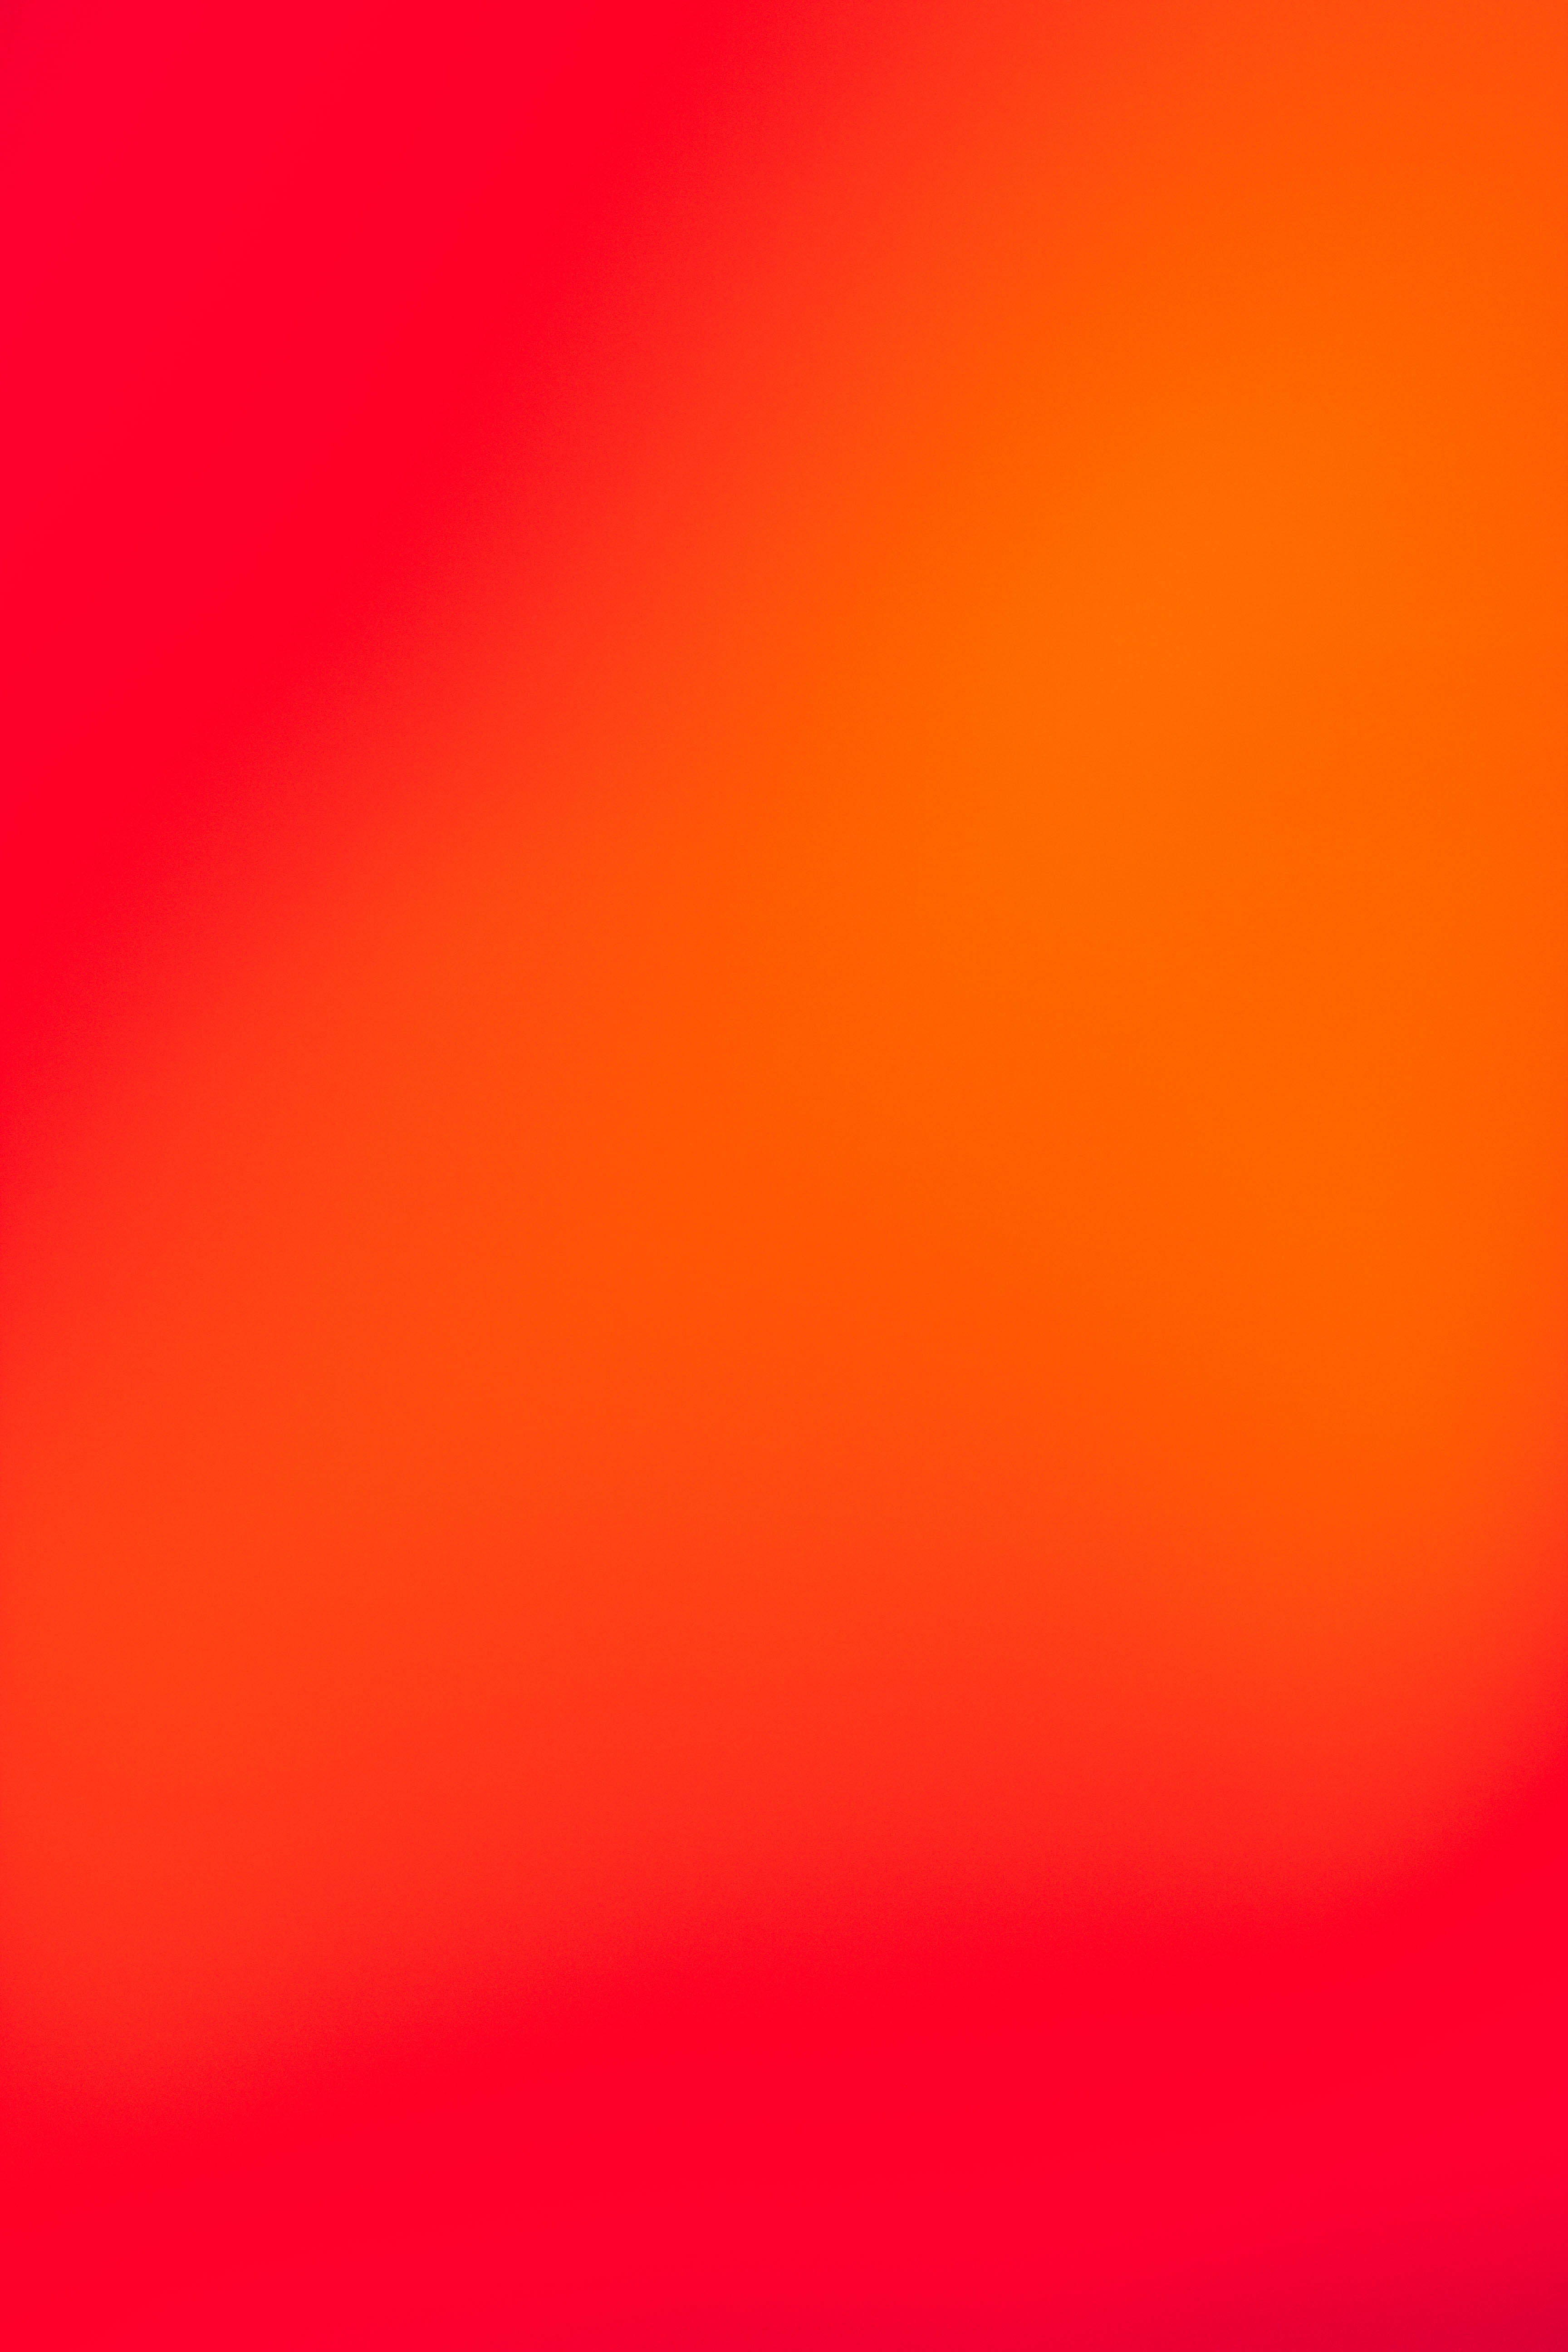 color, abstract, gradient, red, orange, bright